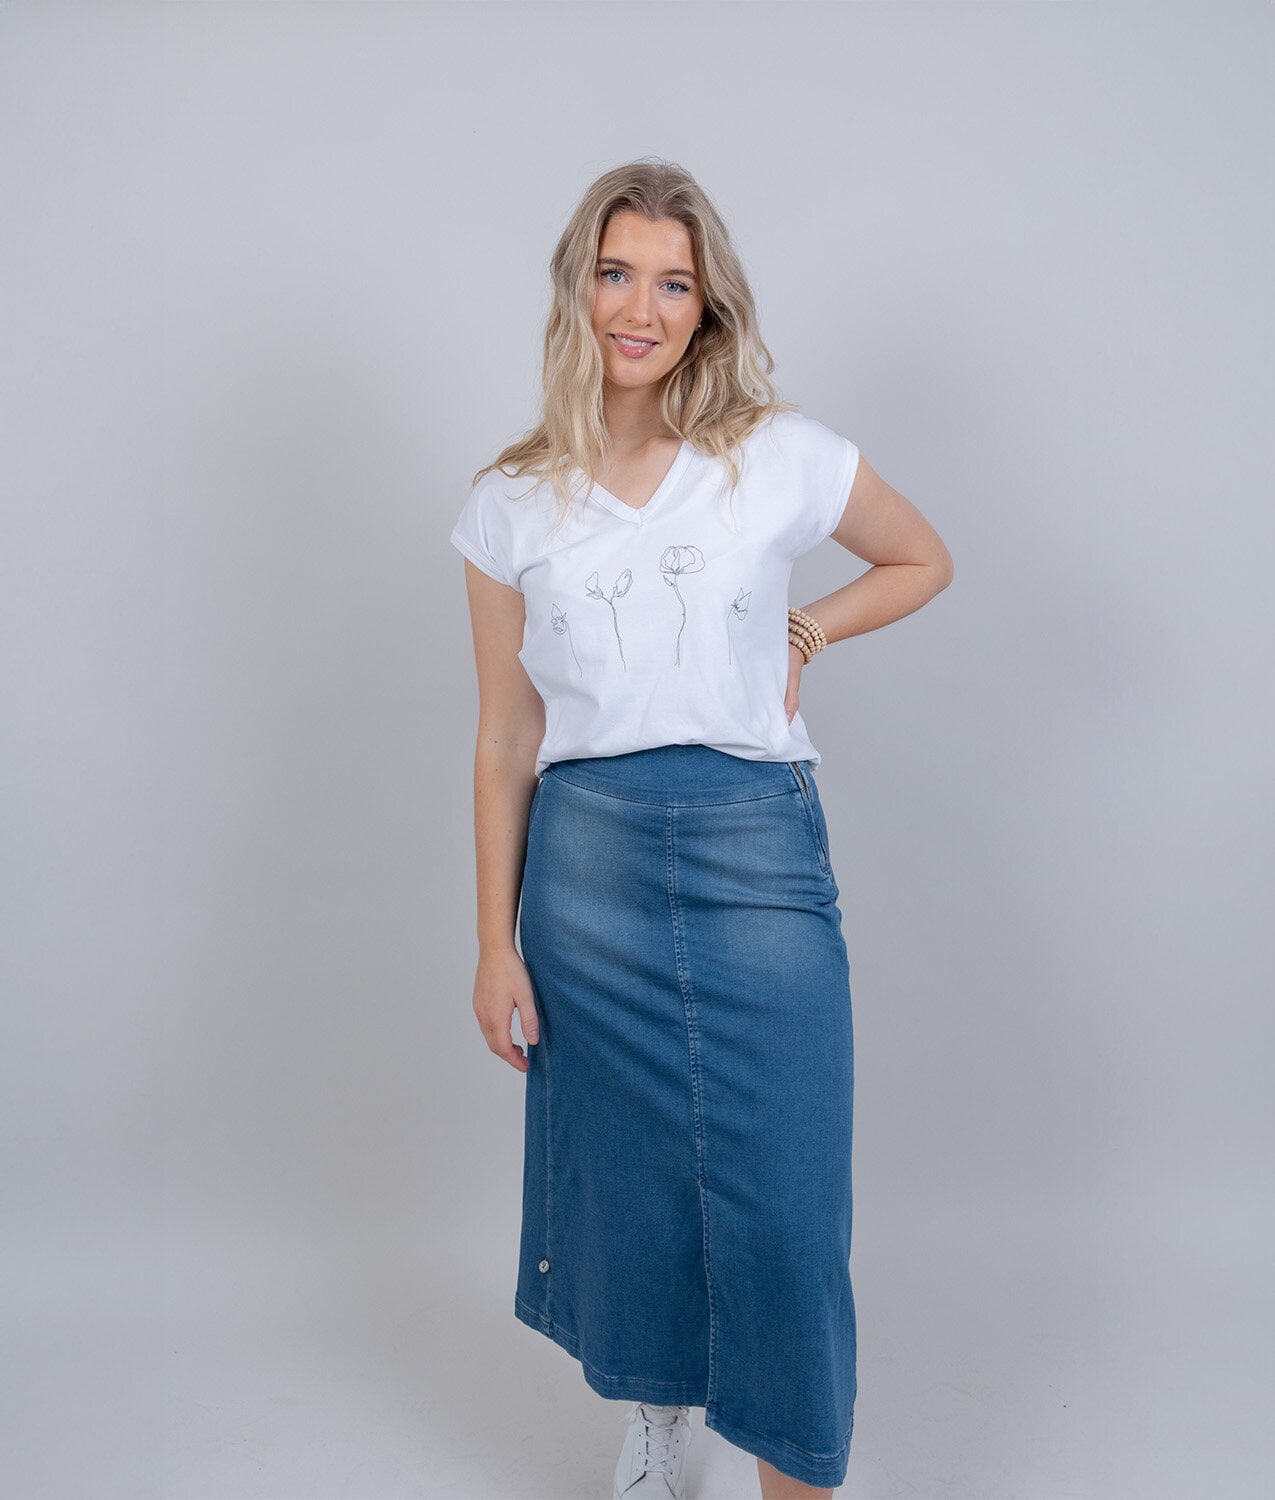 Palermo jeans skirt - mid blue